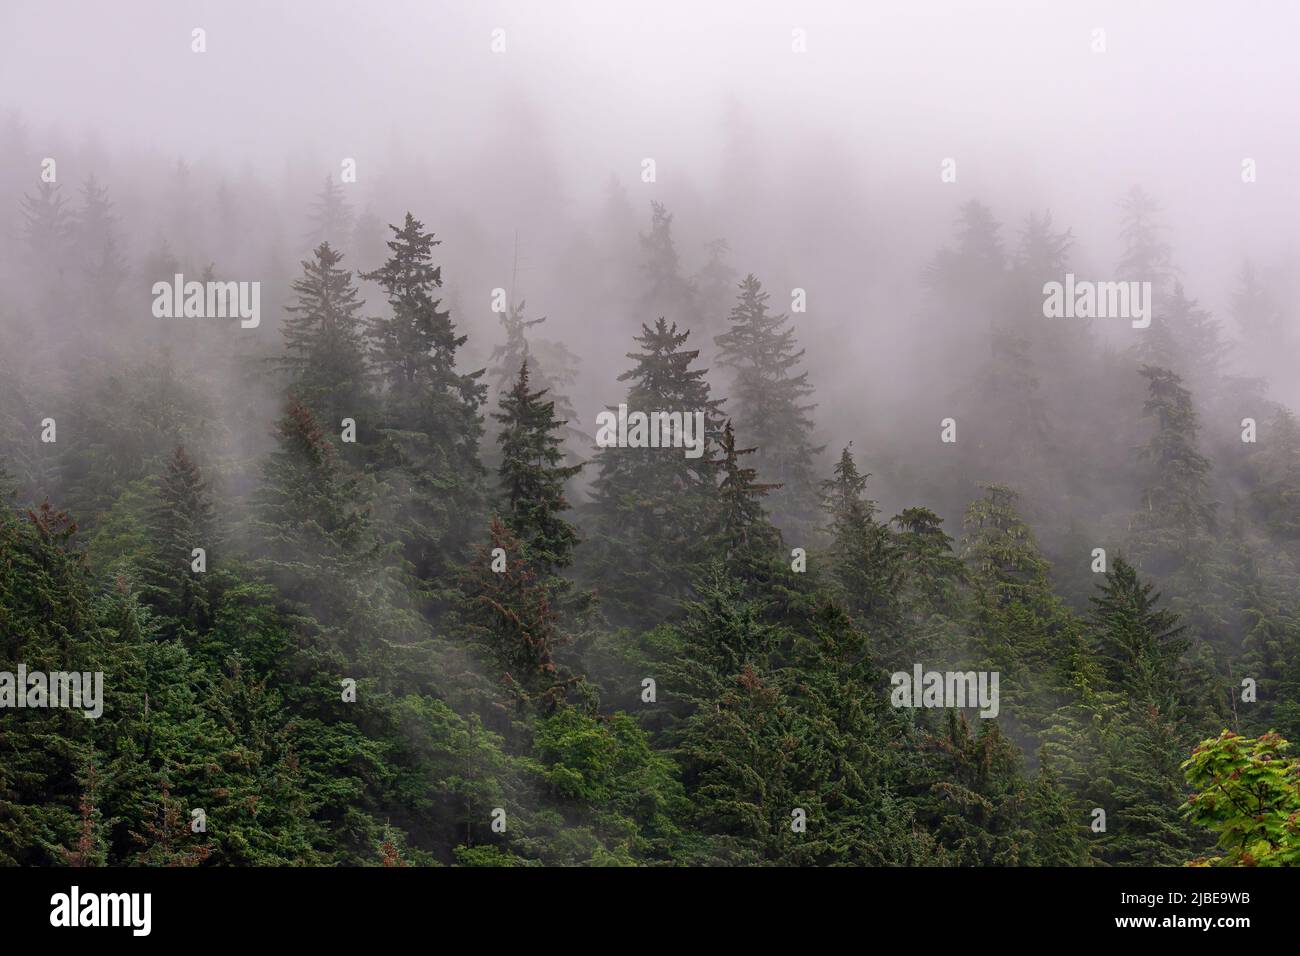 Juneau, Alaska, USA - July 19, 2011: Thick gray fog covers barely-visible dense green pine forest on slope of mountain as if skies fell. Stock Photo